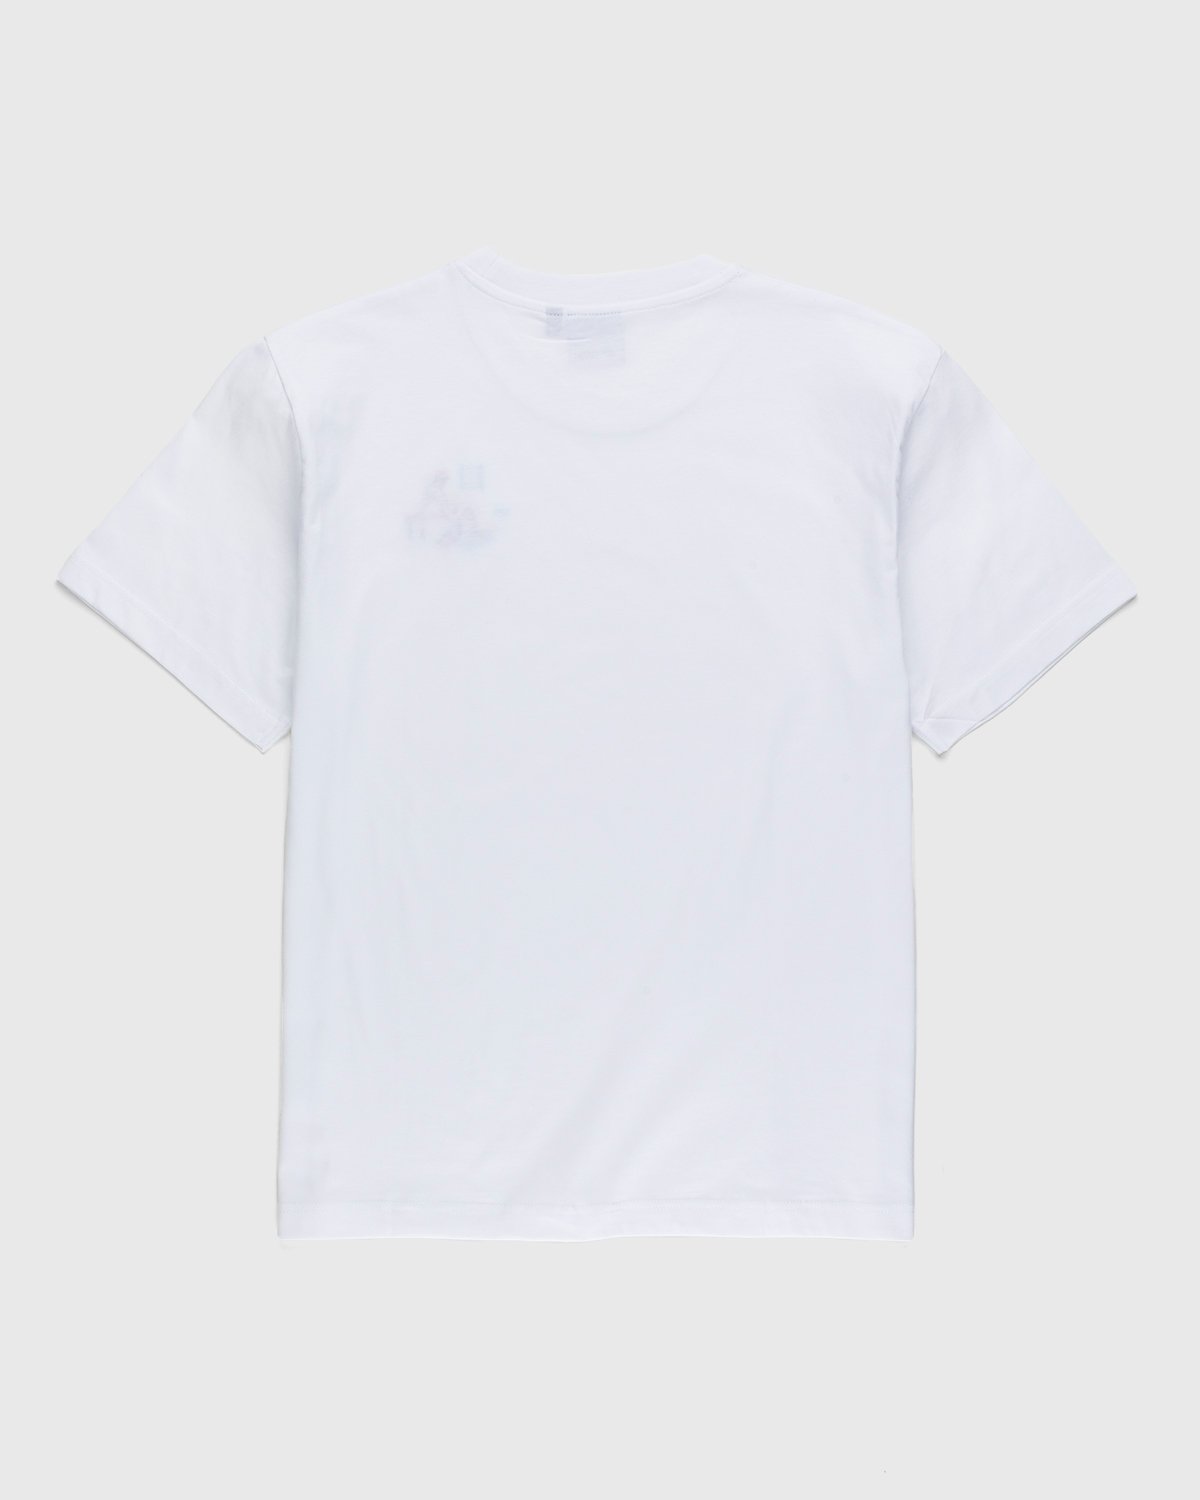 Carne Bollente - Deep Diving T-Shirt White - Clothing - White - Image 2